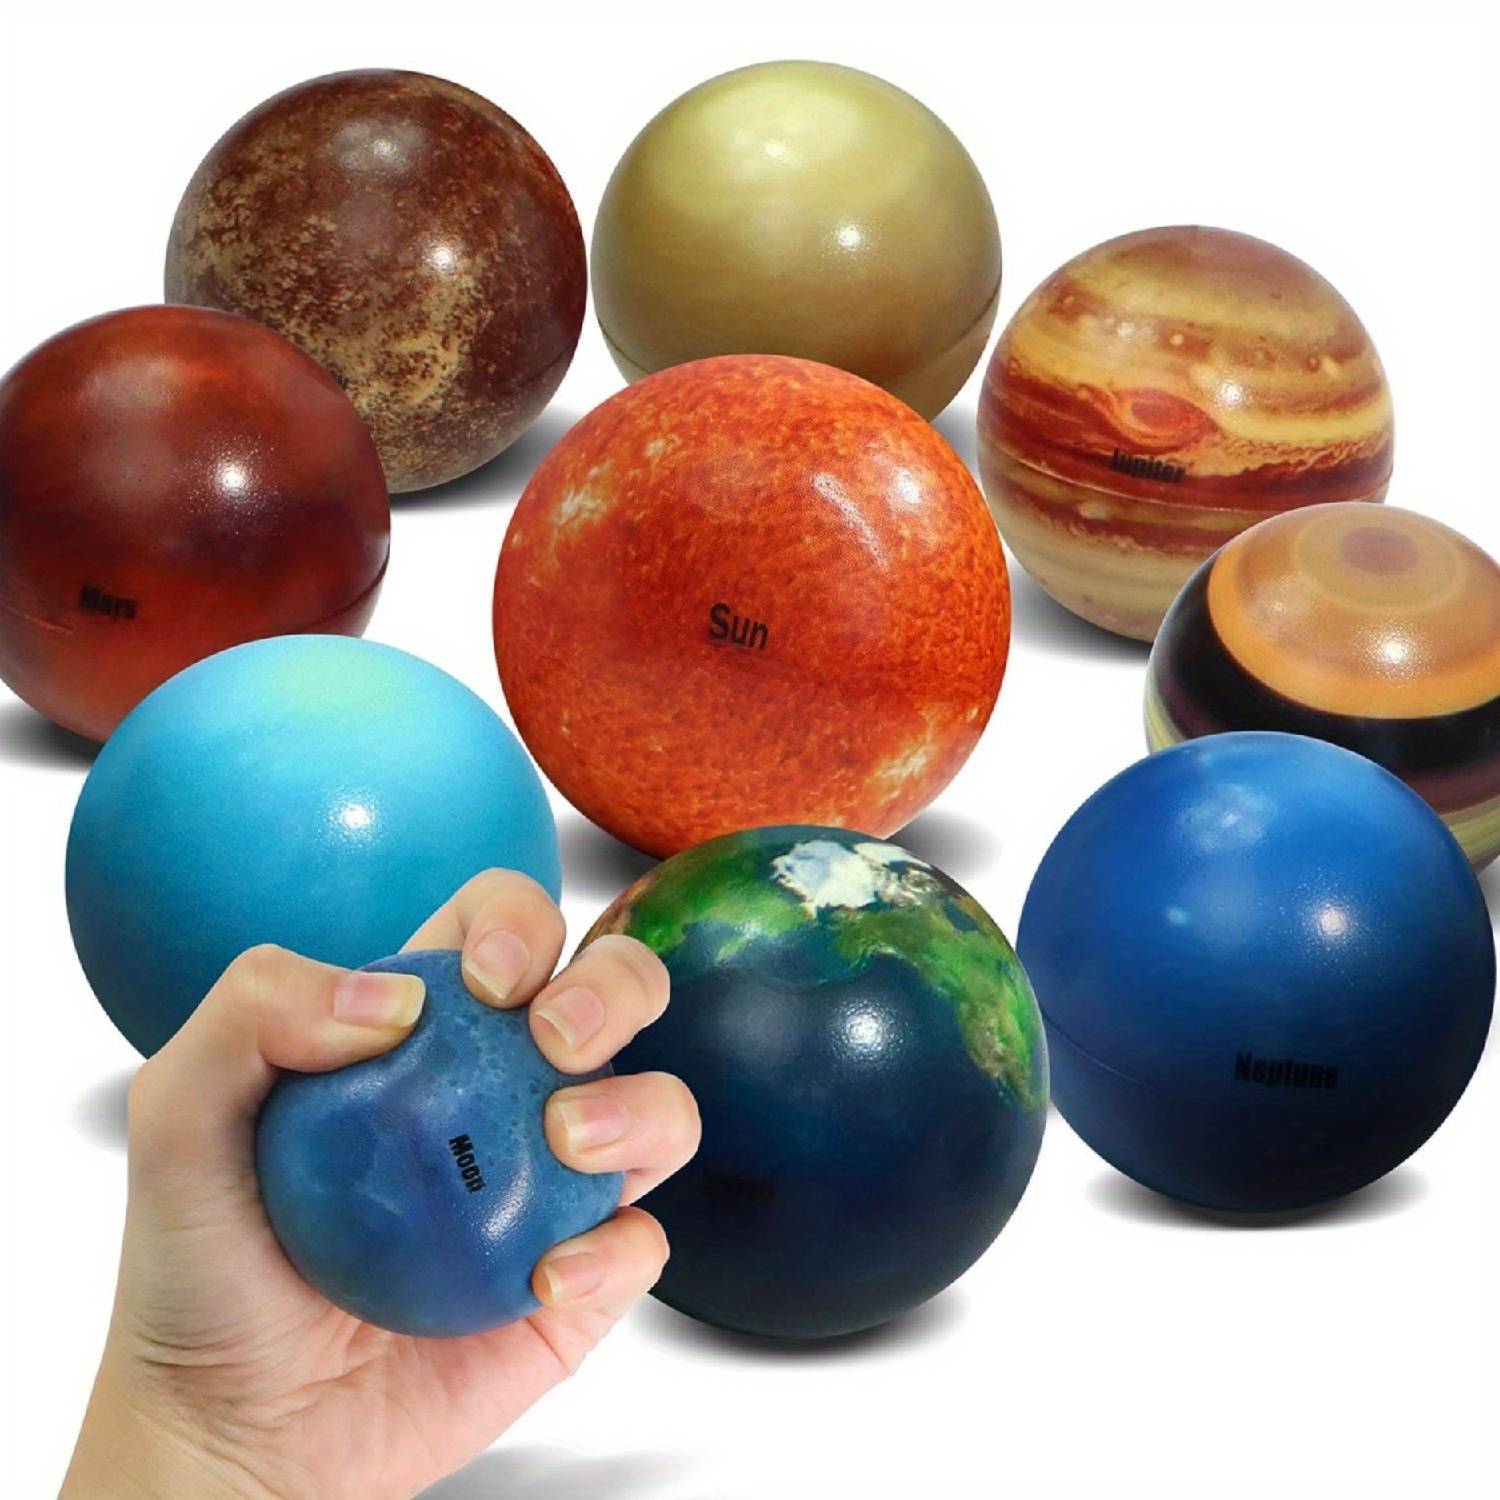 Solar System Planet Balls for Kids Set of 10, Planet Bouncy Balls for Kids Early Learning, Hand Squeeze Sensory Ball Toy, Anti Stress Ball Stress